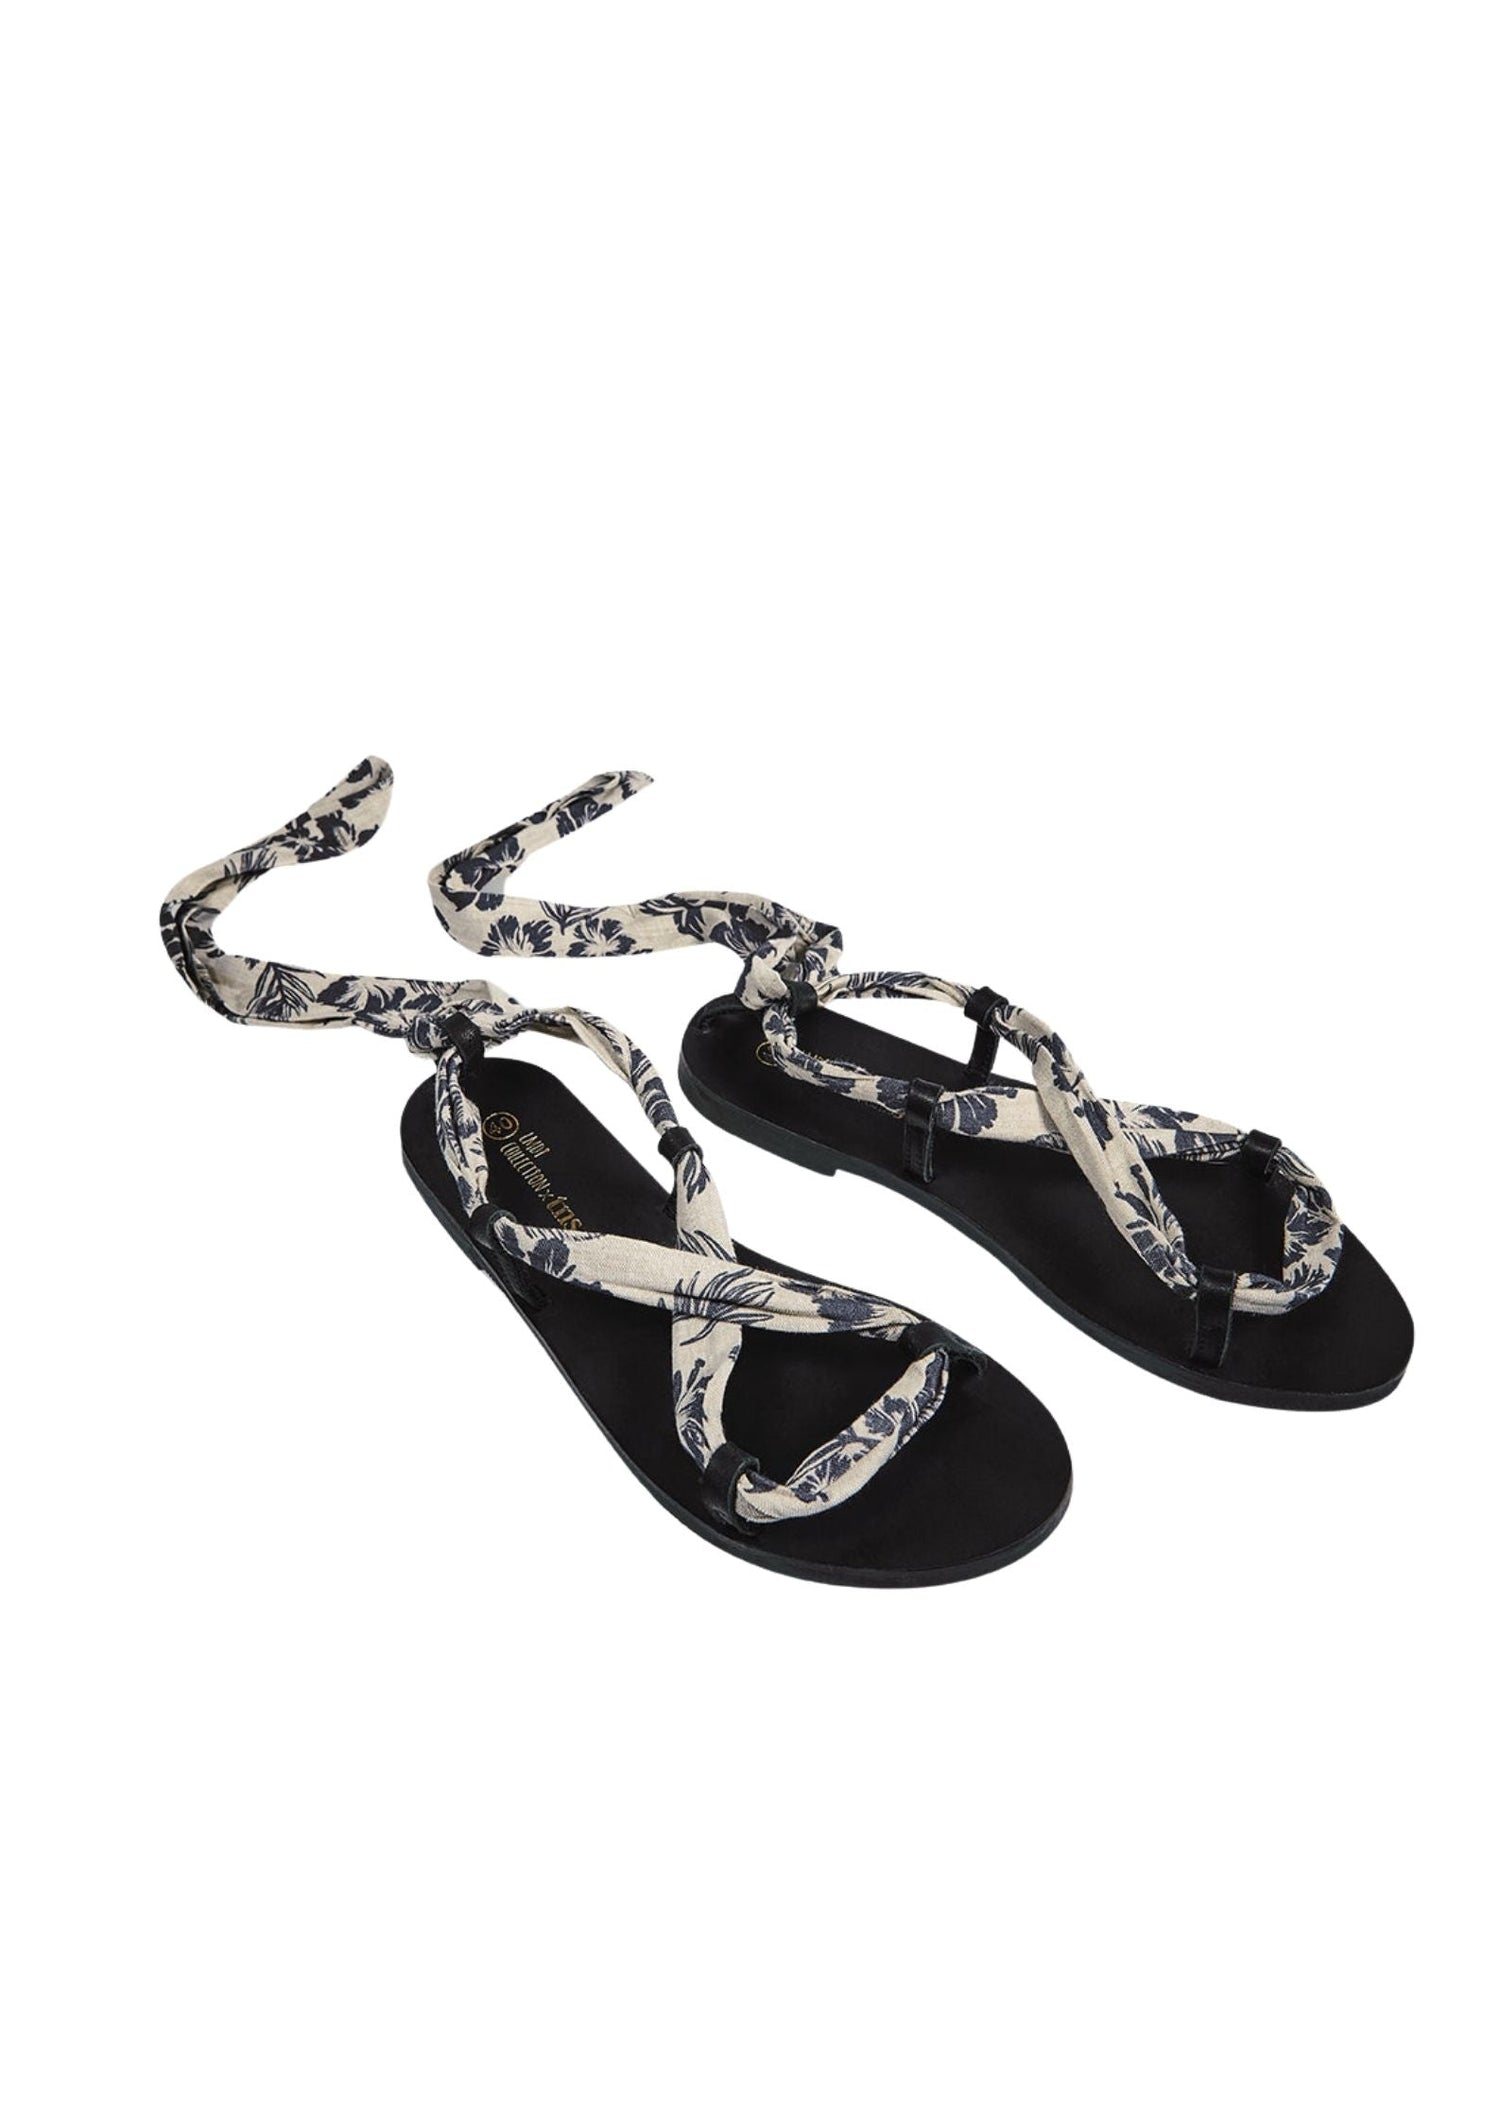 Hibiscus Girl Sandal Shoes The New Society 